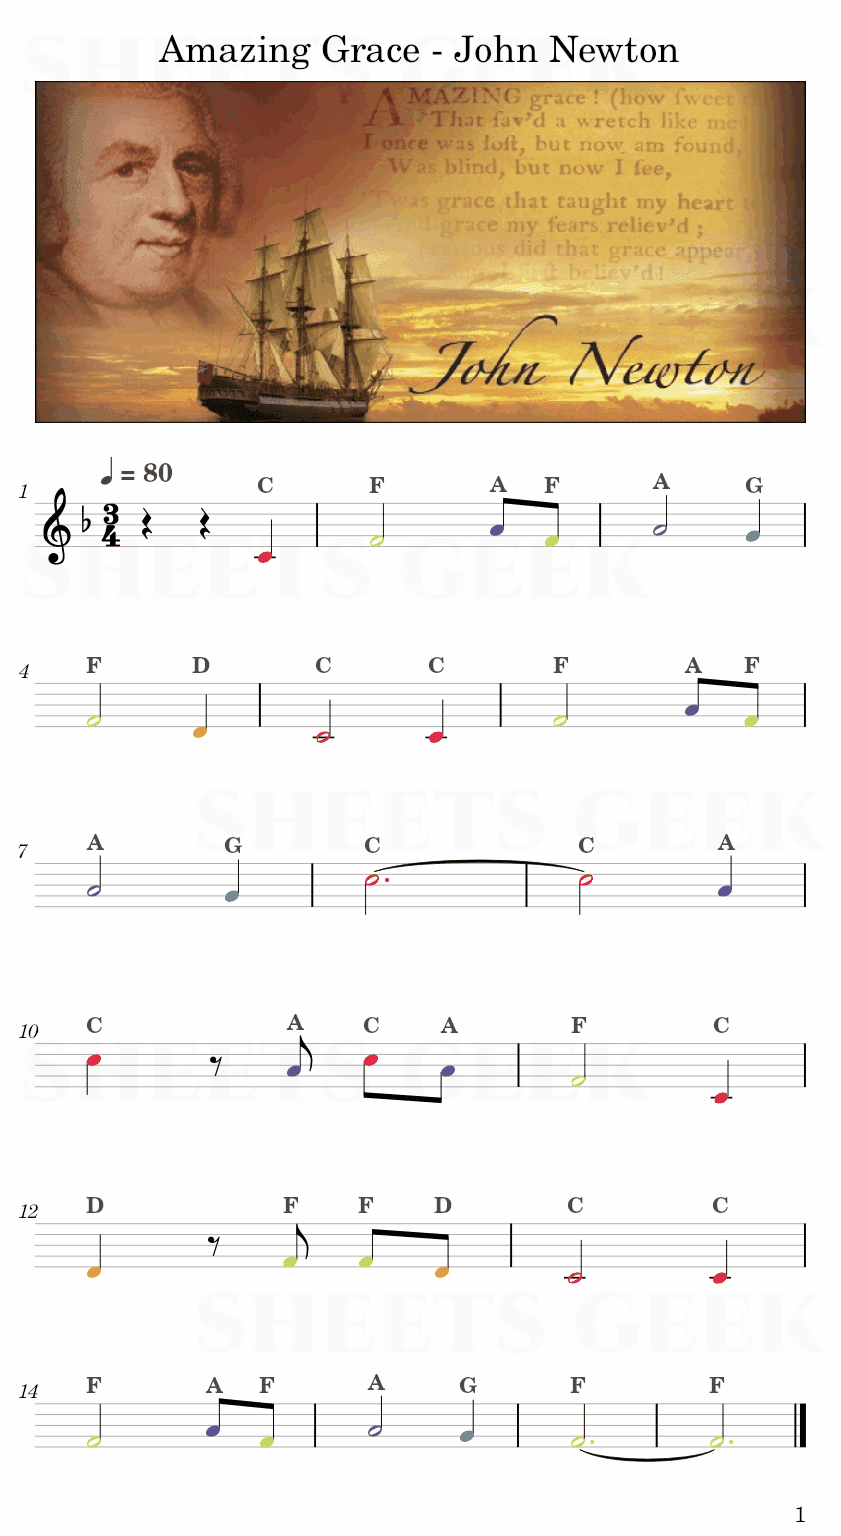 Amazing Grace - John Newton Easy Sheet Music Free for piano, keyboard, flute, violin, sax, cello page 1